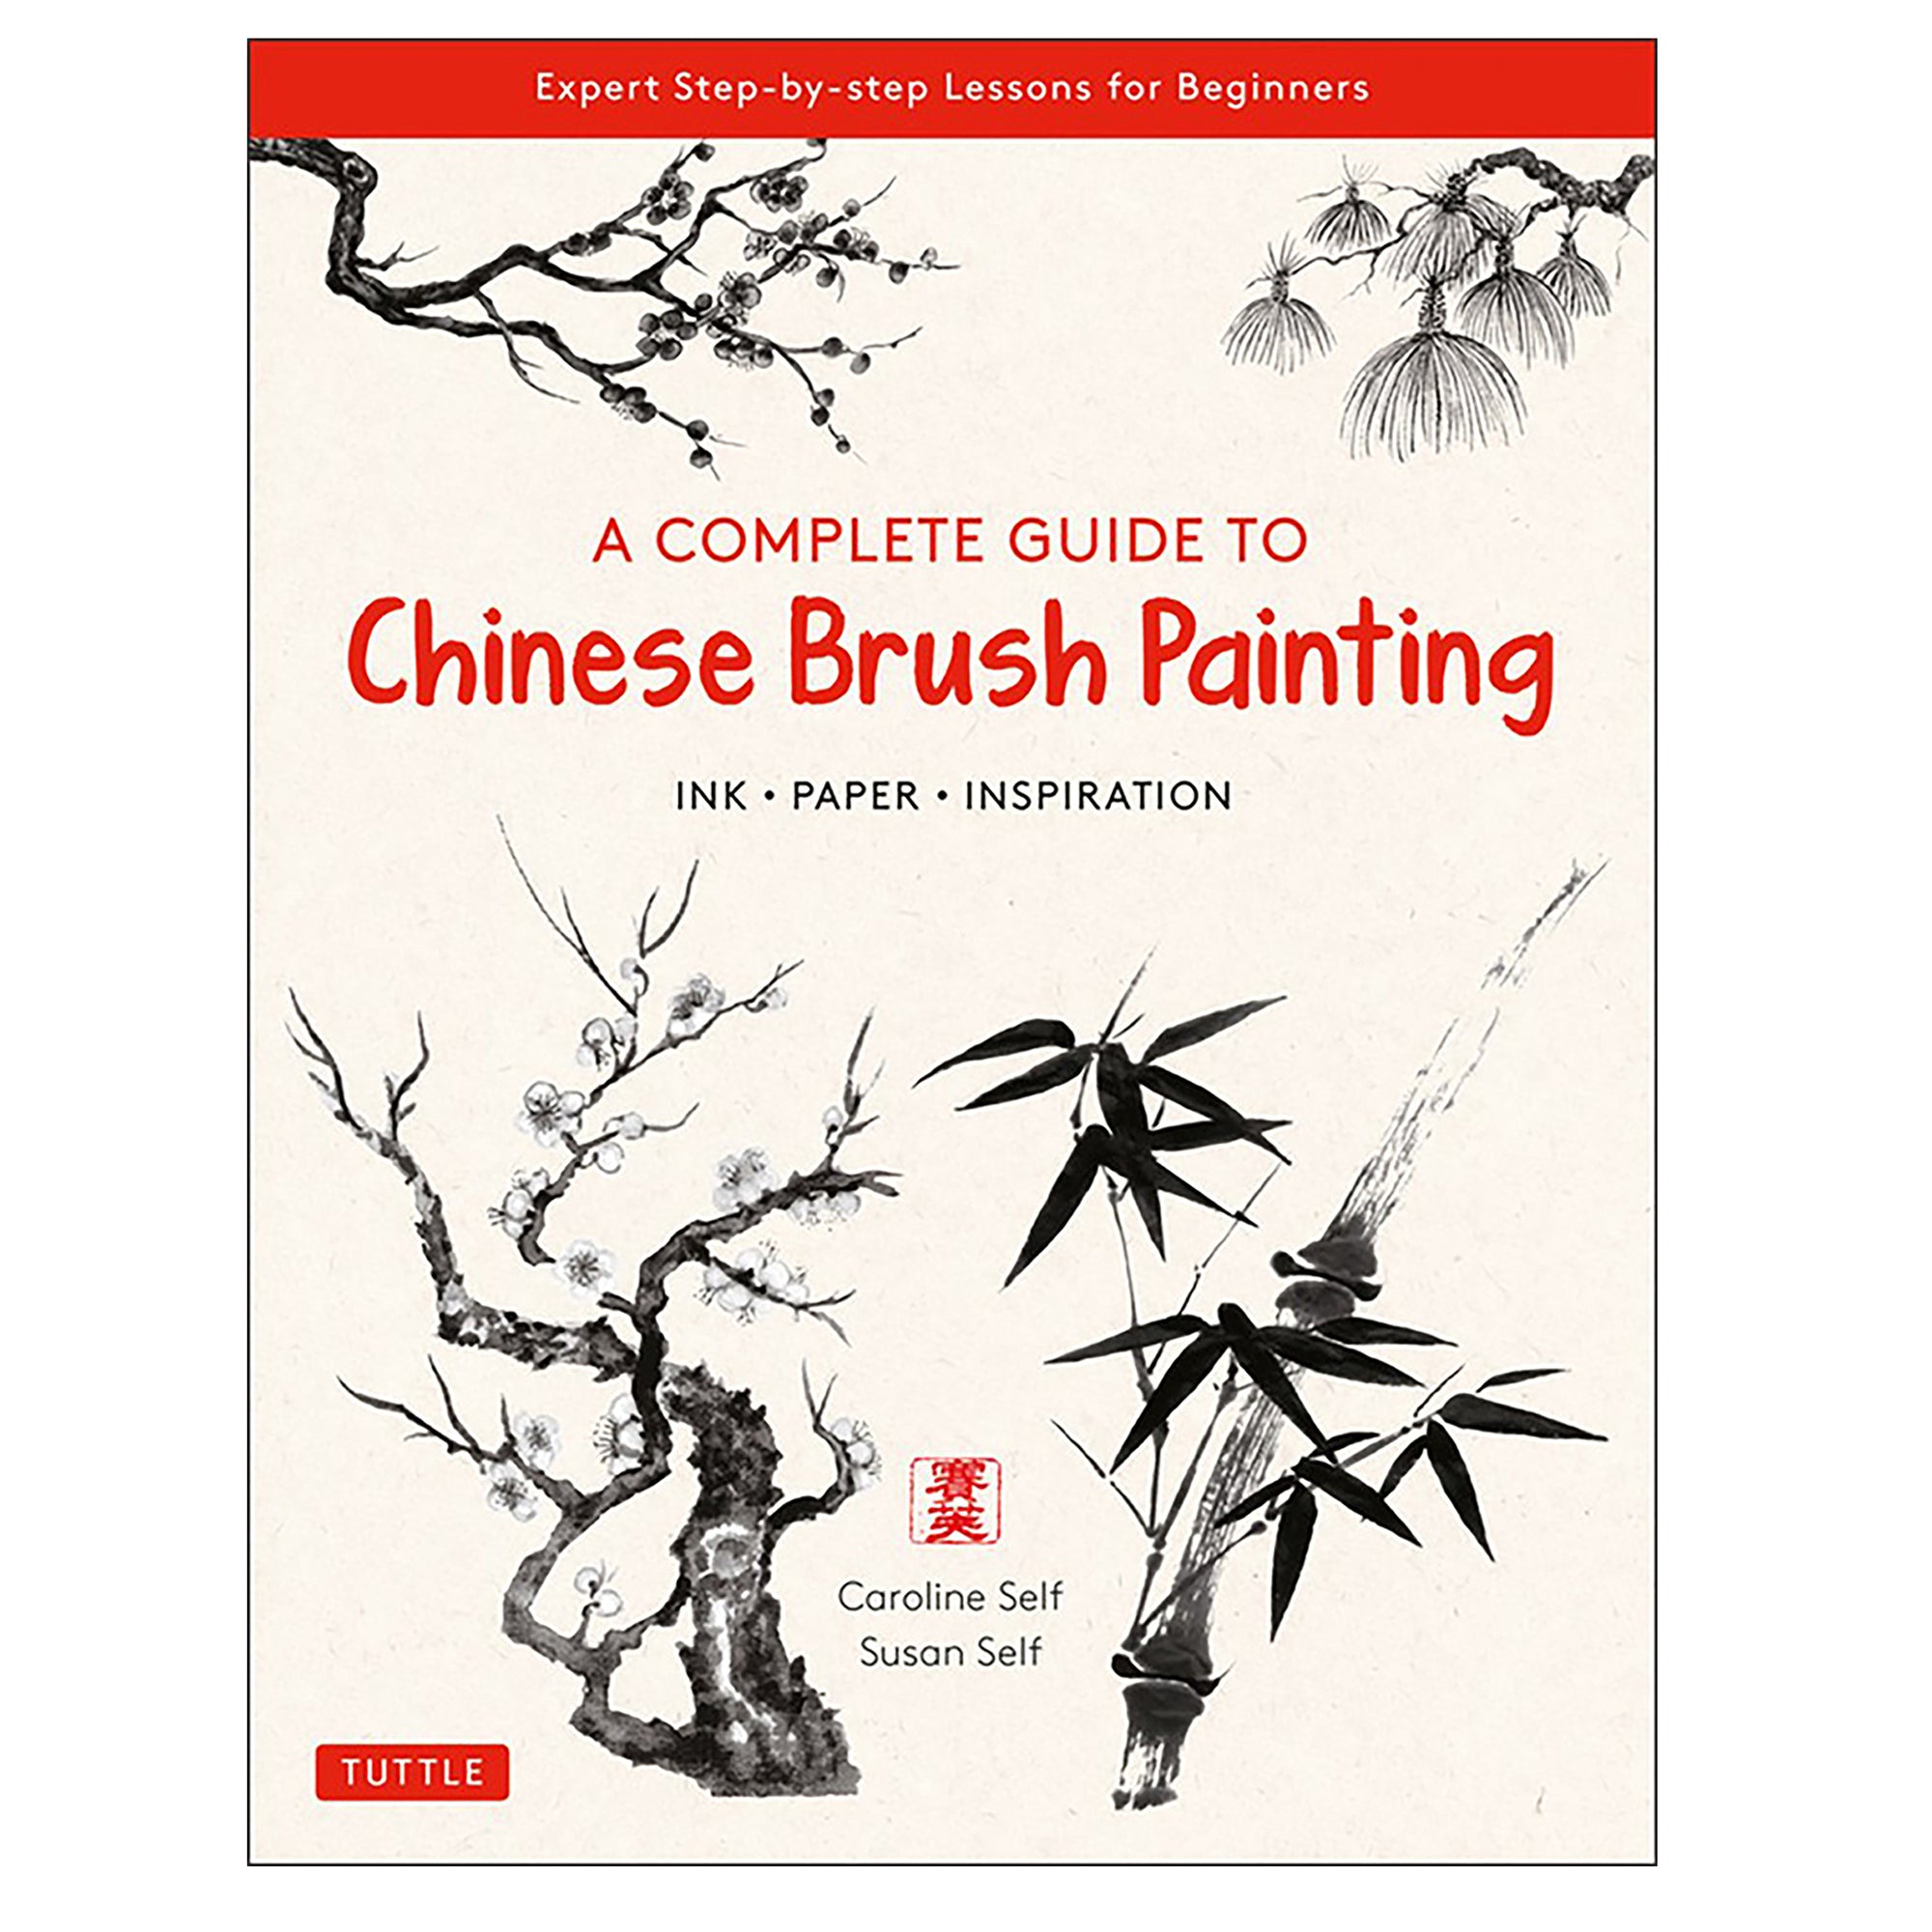 A Complete Guide to Chinese Brush Painting - C. Self & S. Self